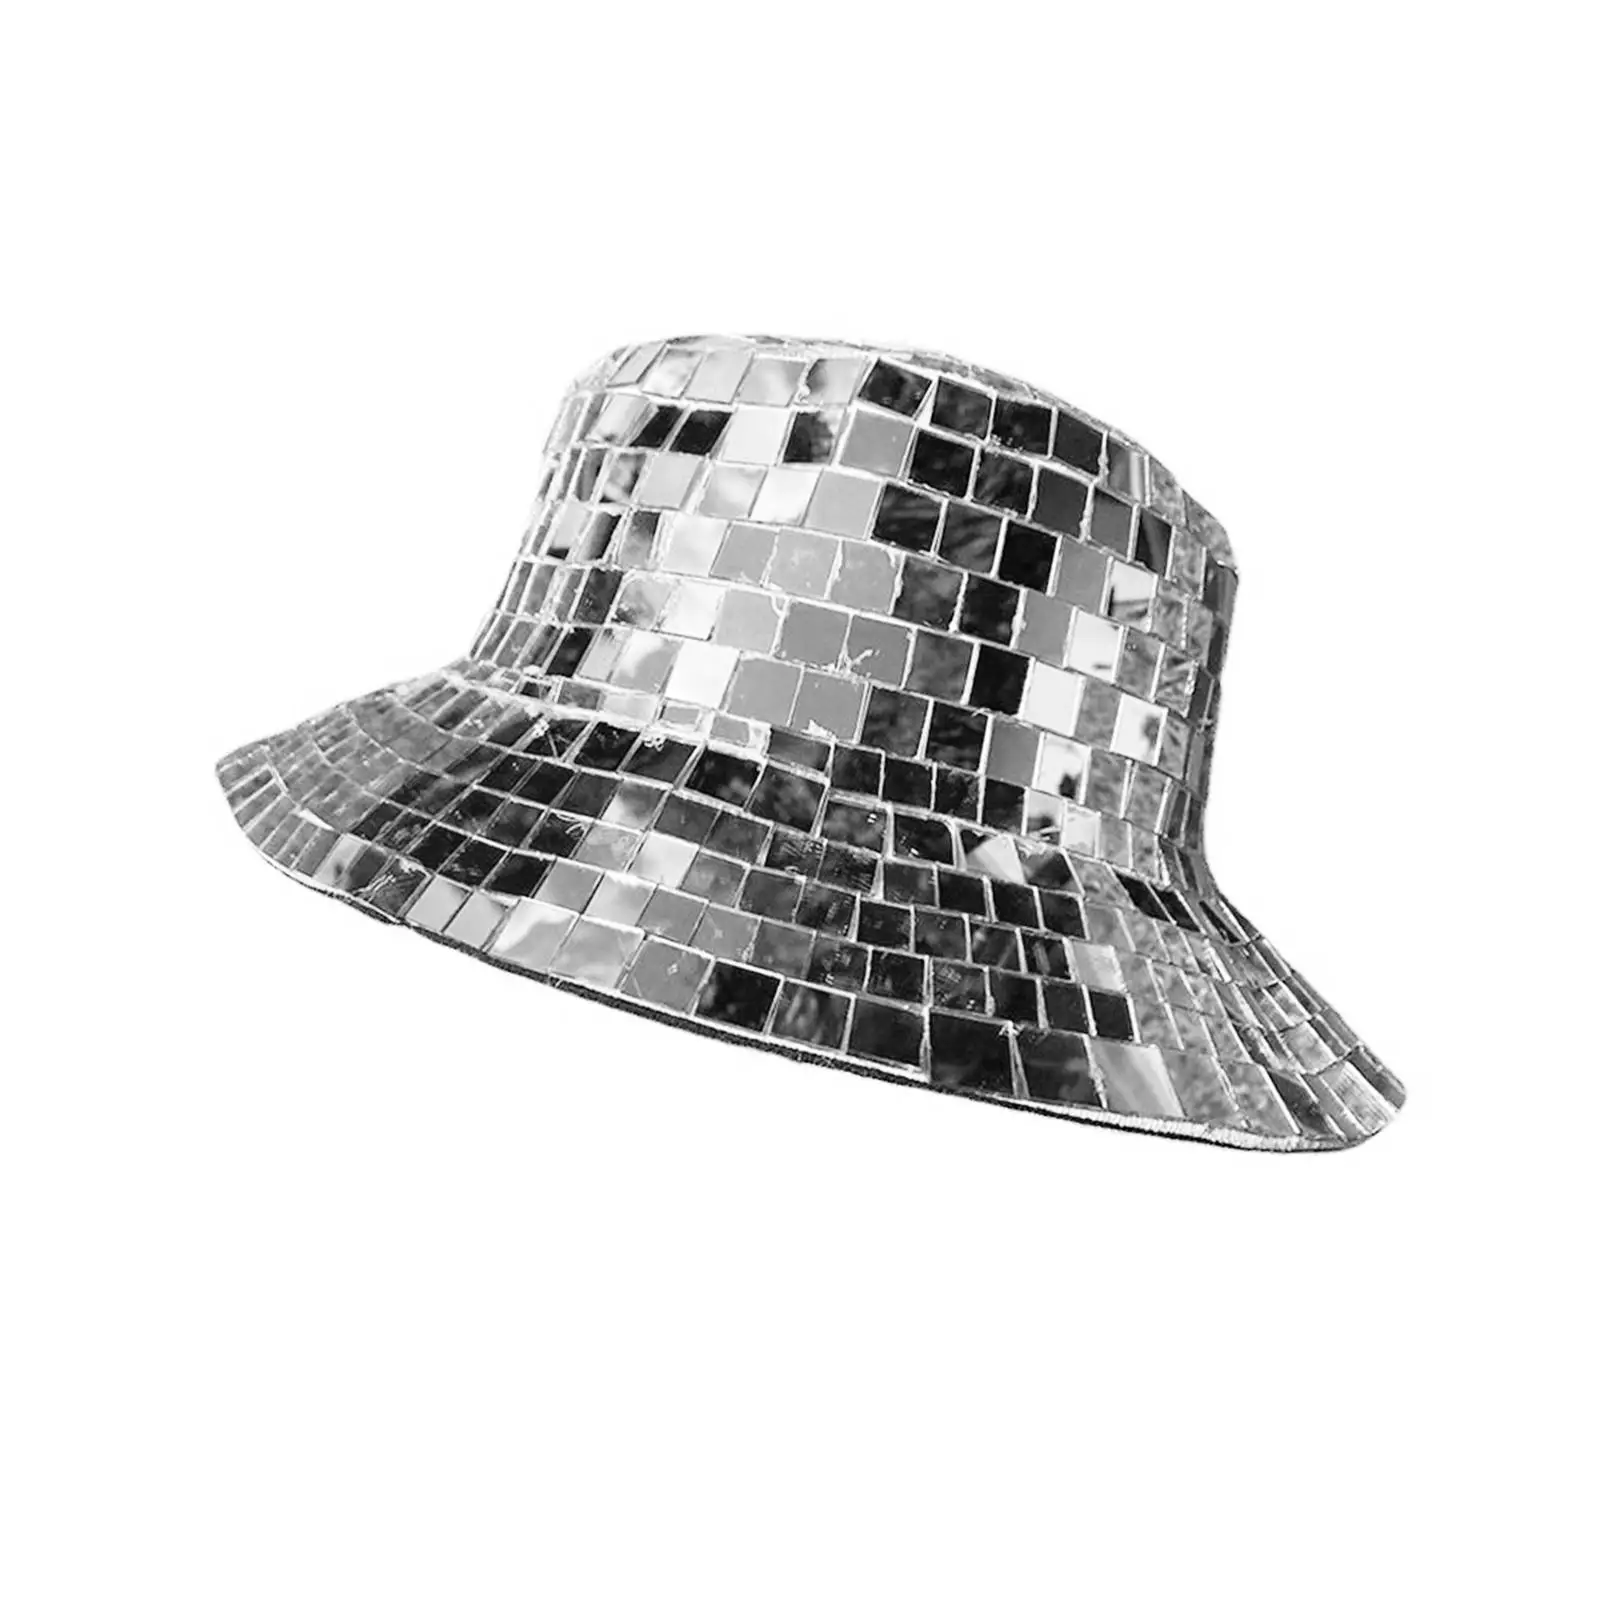 Disco Bucket Hat Personality Versatile Glass Party Hats Fisherman Hat Beach Caps for Carnivals Parties Clubs Travels Street